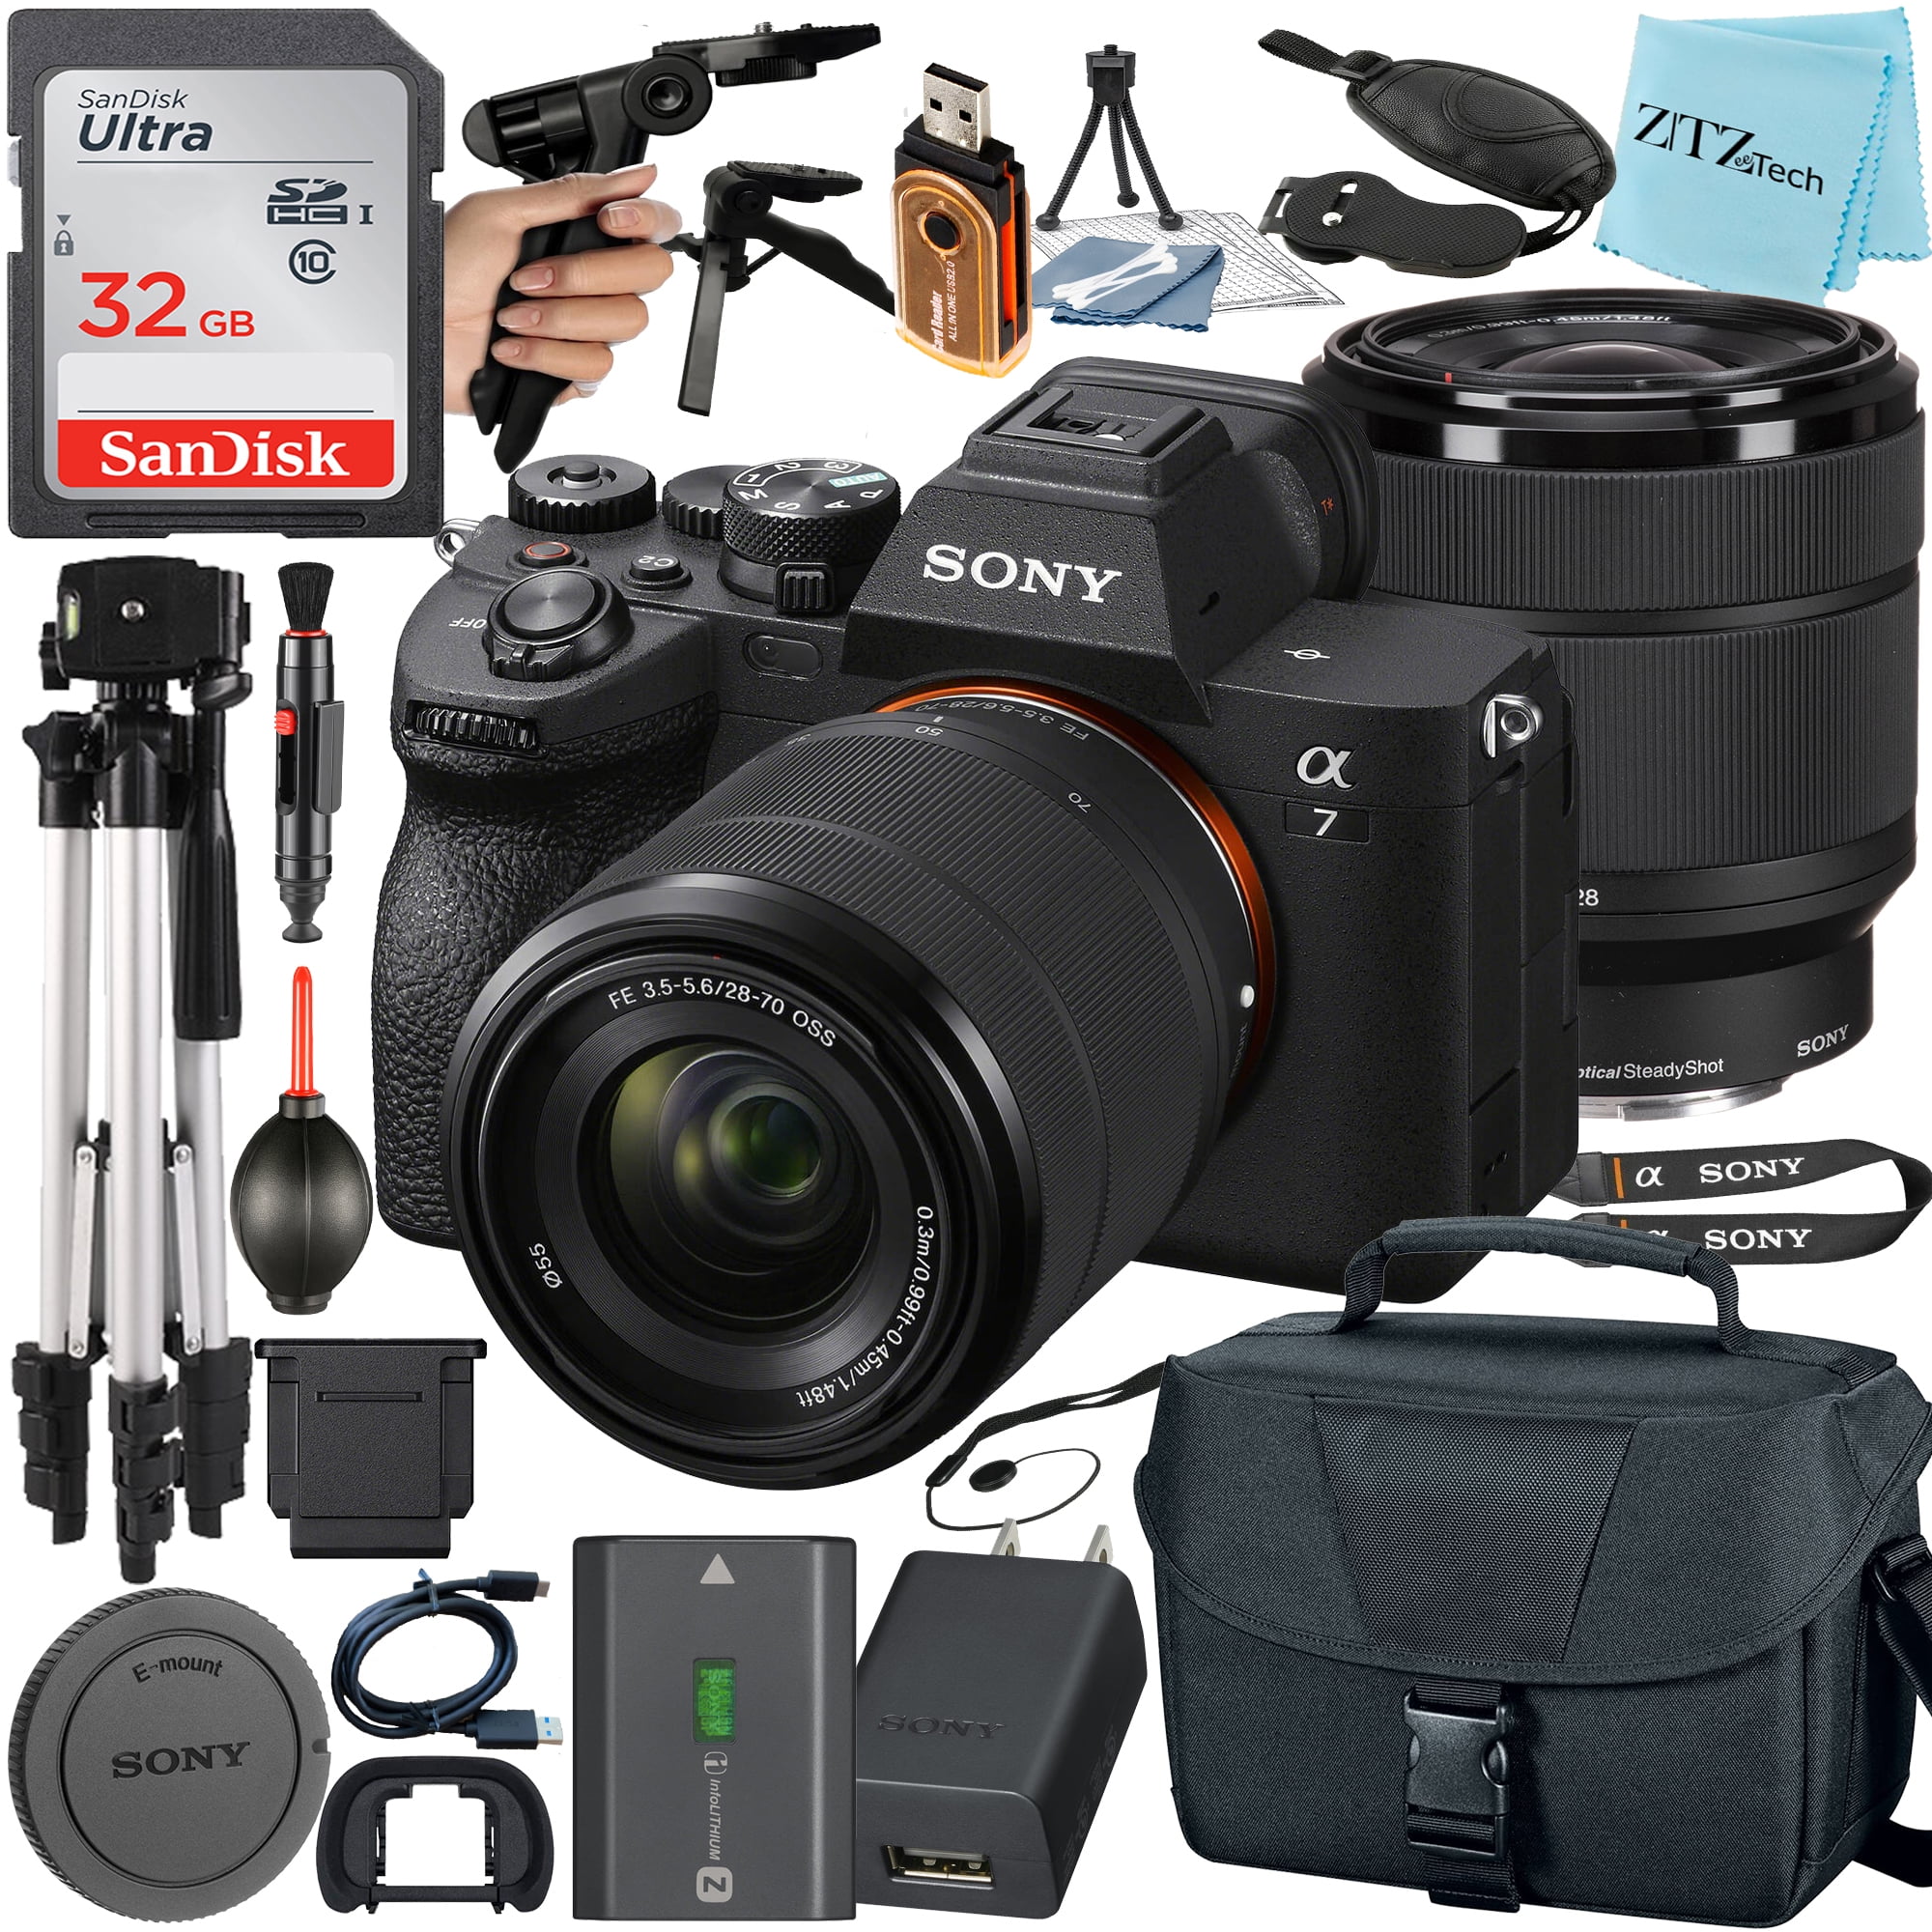 Sony Alpha a7 IV Full-frame Mirrorless Interchangeable Lens Camera,Body Ony  + 32GB Card, Tripod, Case, and More 20pc Bundle 